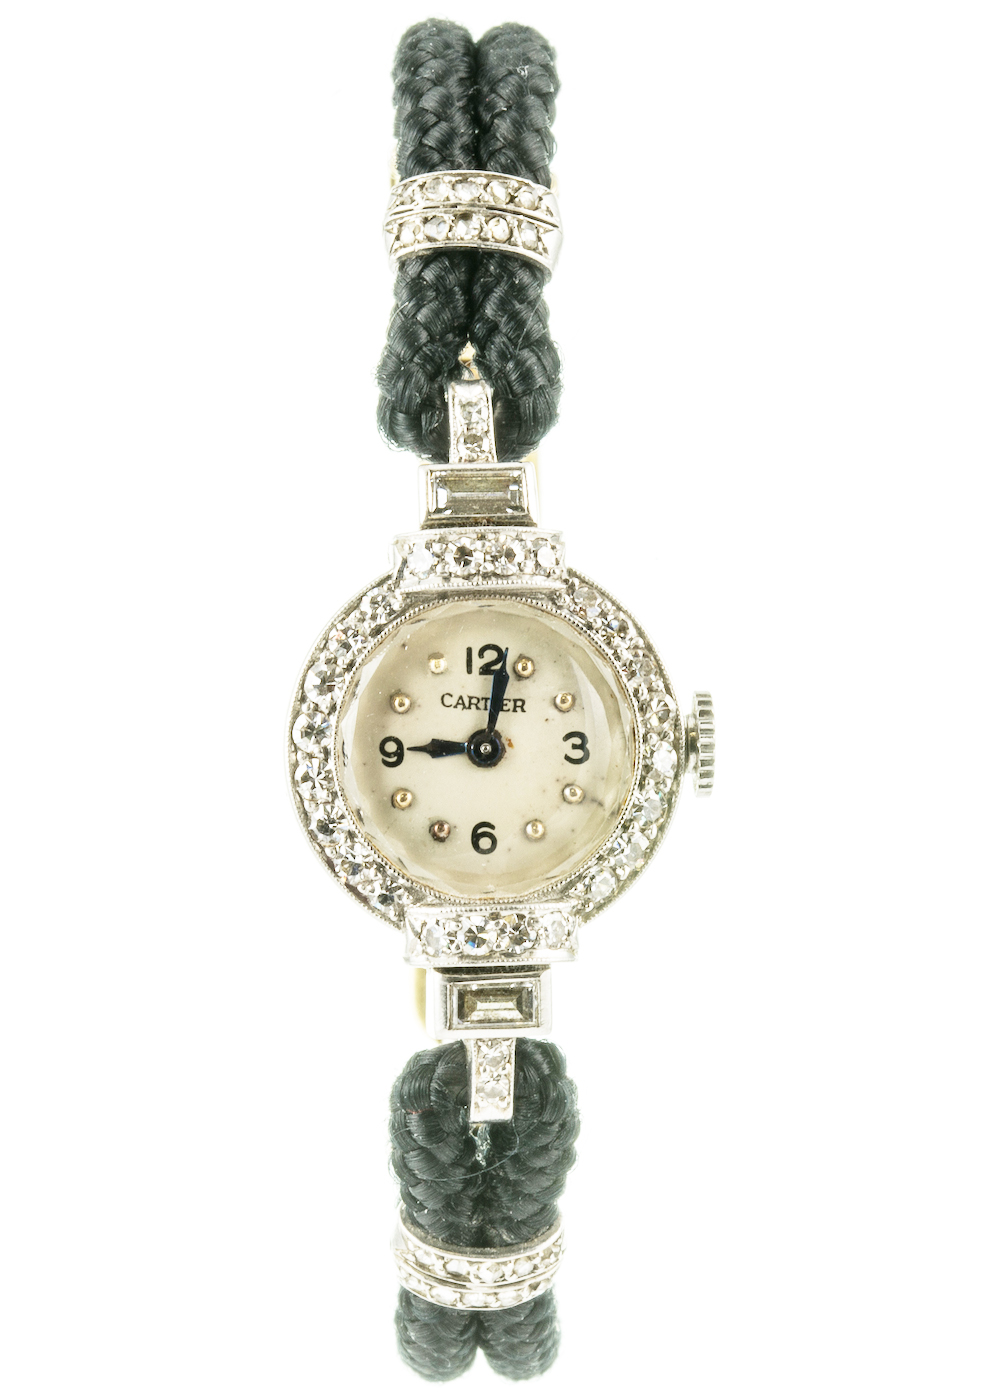 A fine lady's platinum, enamel, silk and diamond wrist watch by Cartier, clasp numbered 1667, dial